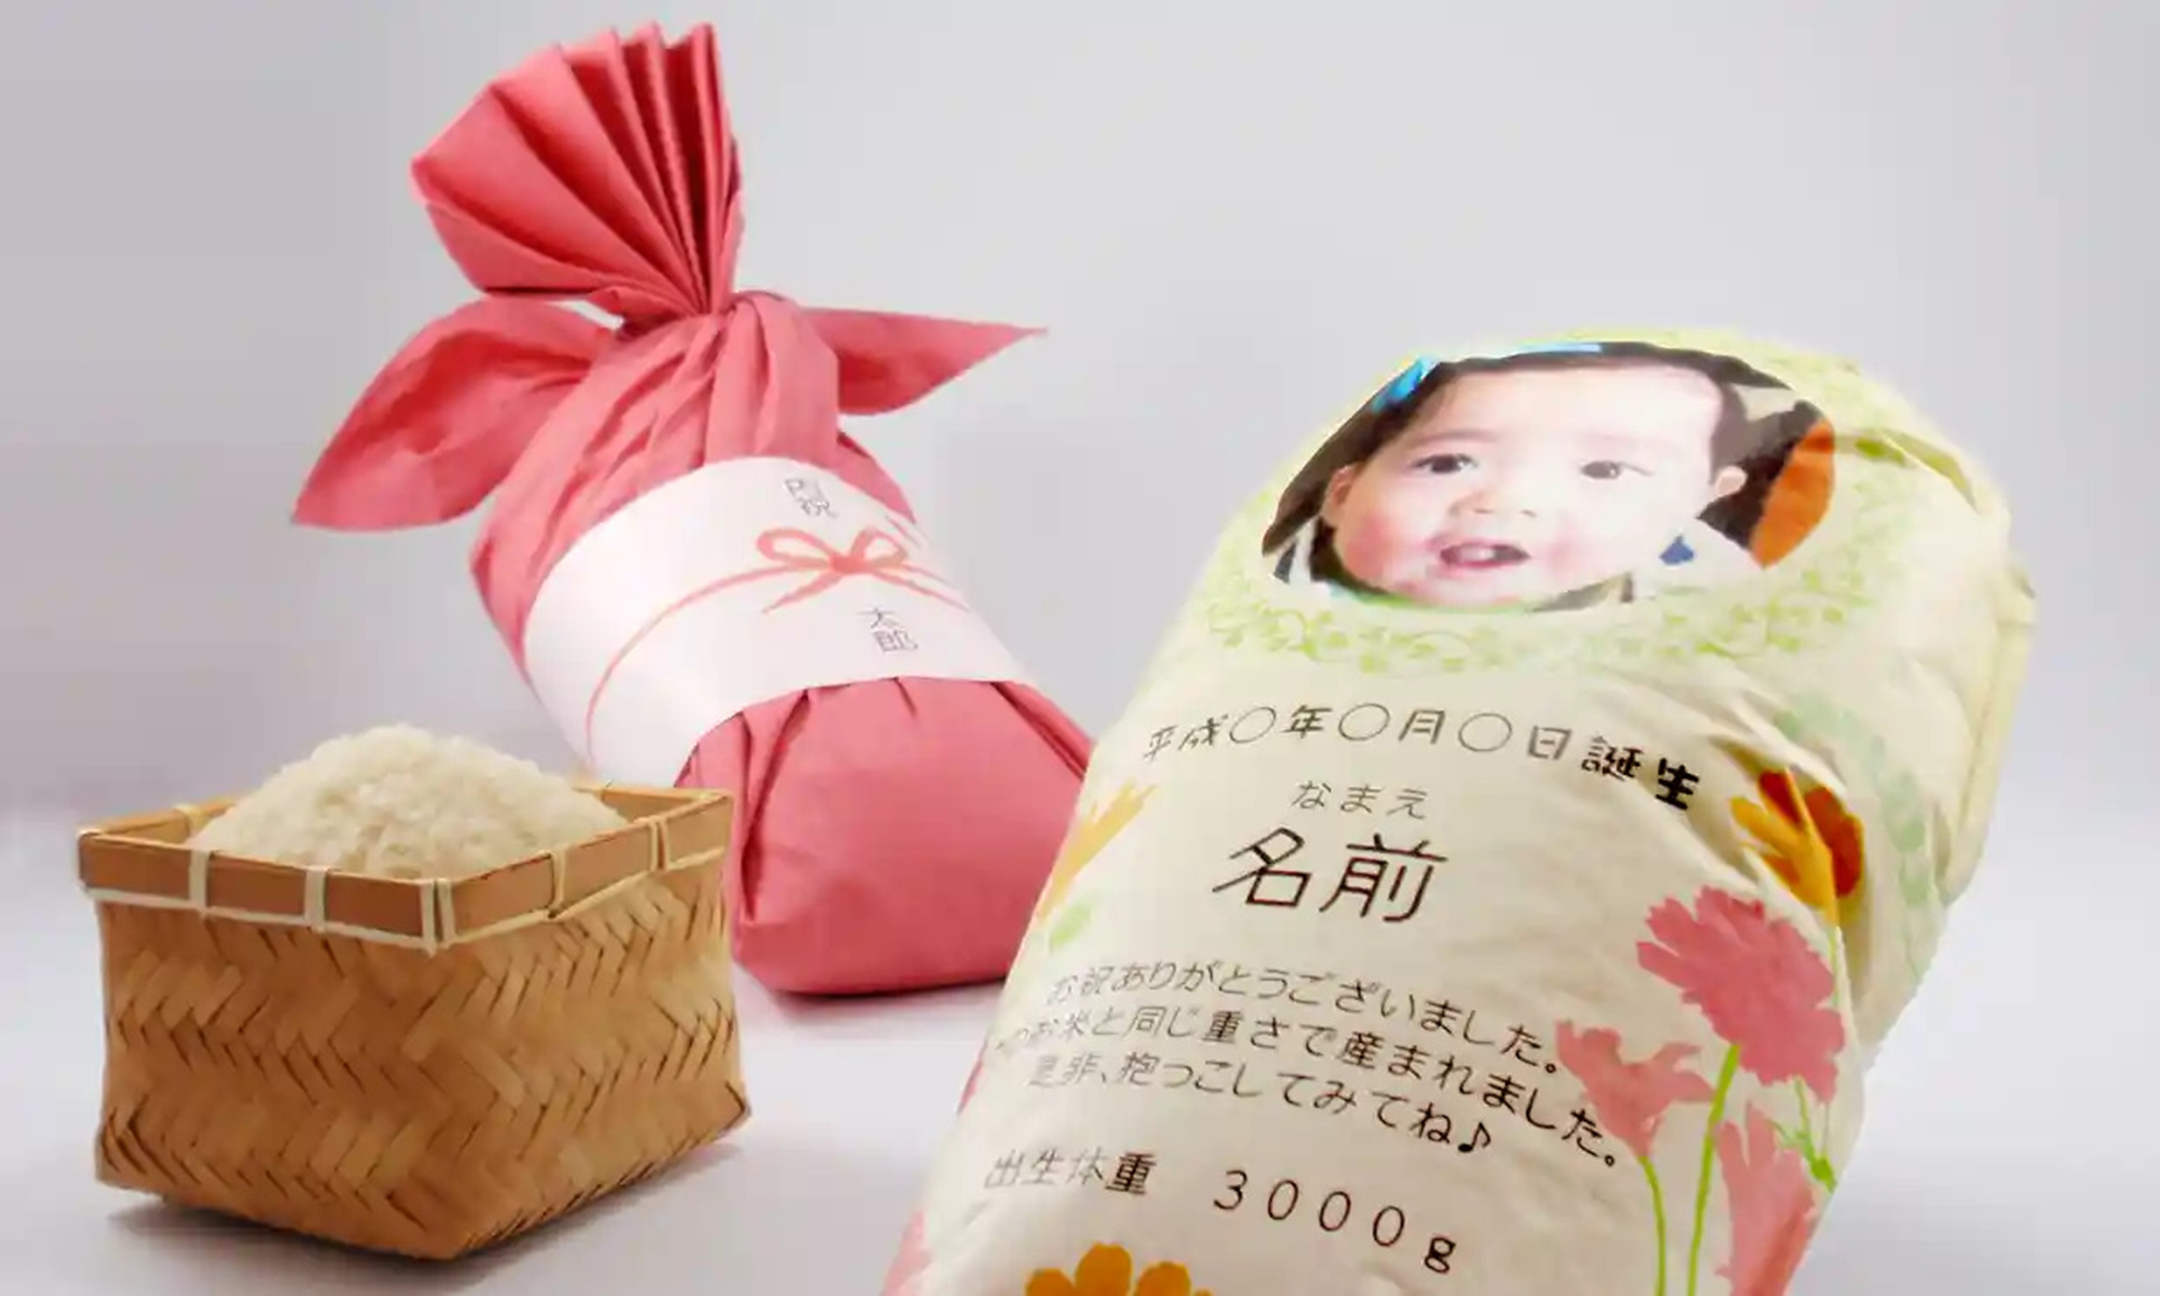 Bag of rice in the form of a newborn in a blanket, on the right; a red wrapped blanked in the middle background, and a box of cooked rice on the left